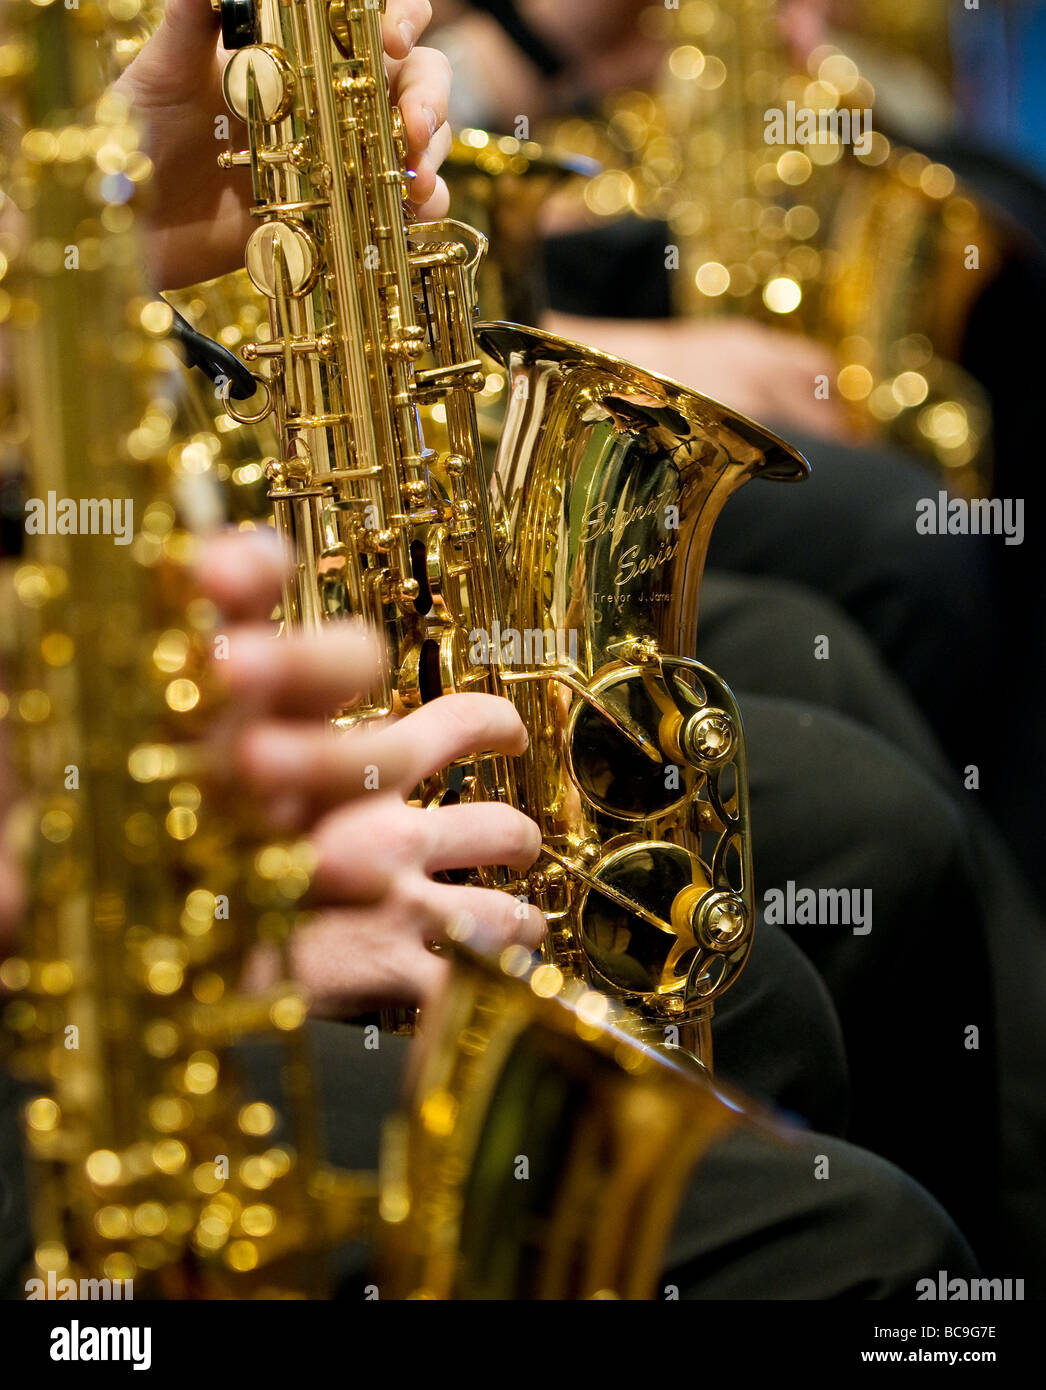 Saxophones being played in an orchestra. Stock Photo